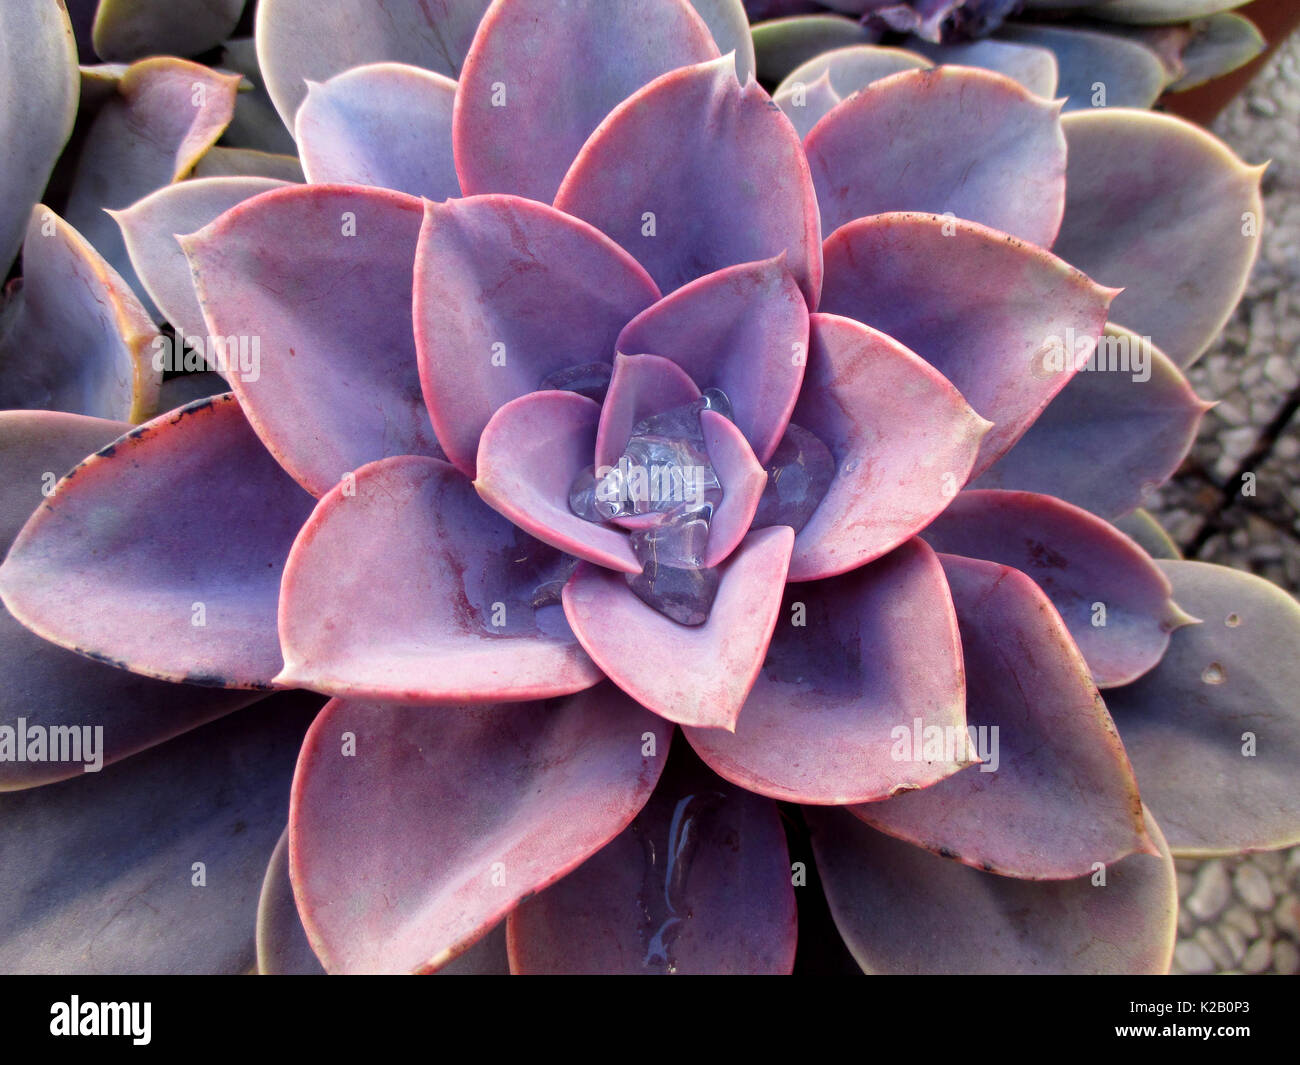 Close-up of Pastel Purple Succulent Plants with Morning Dew Drops Stock Photo